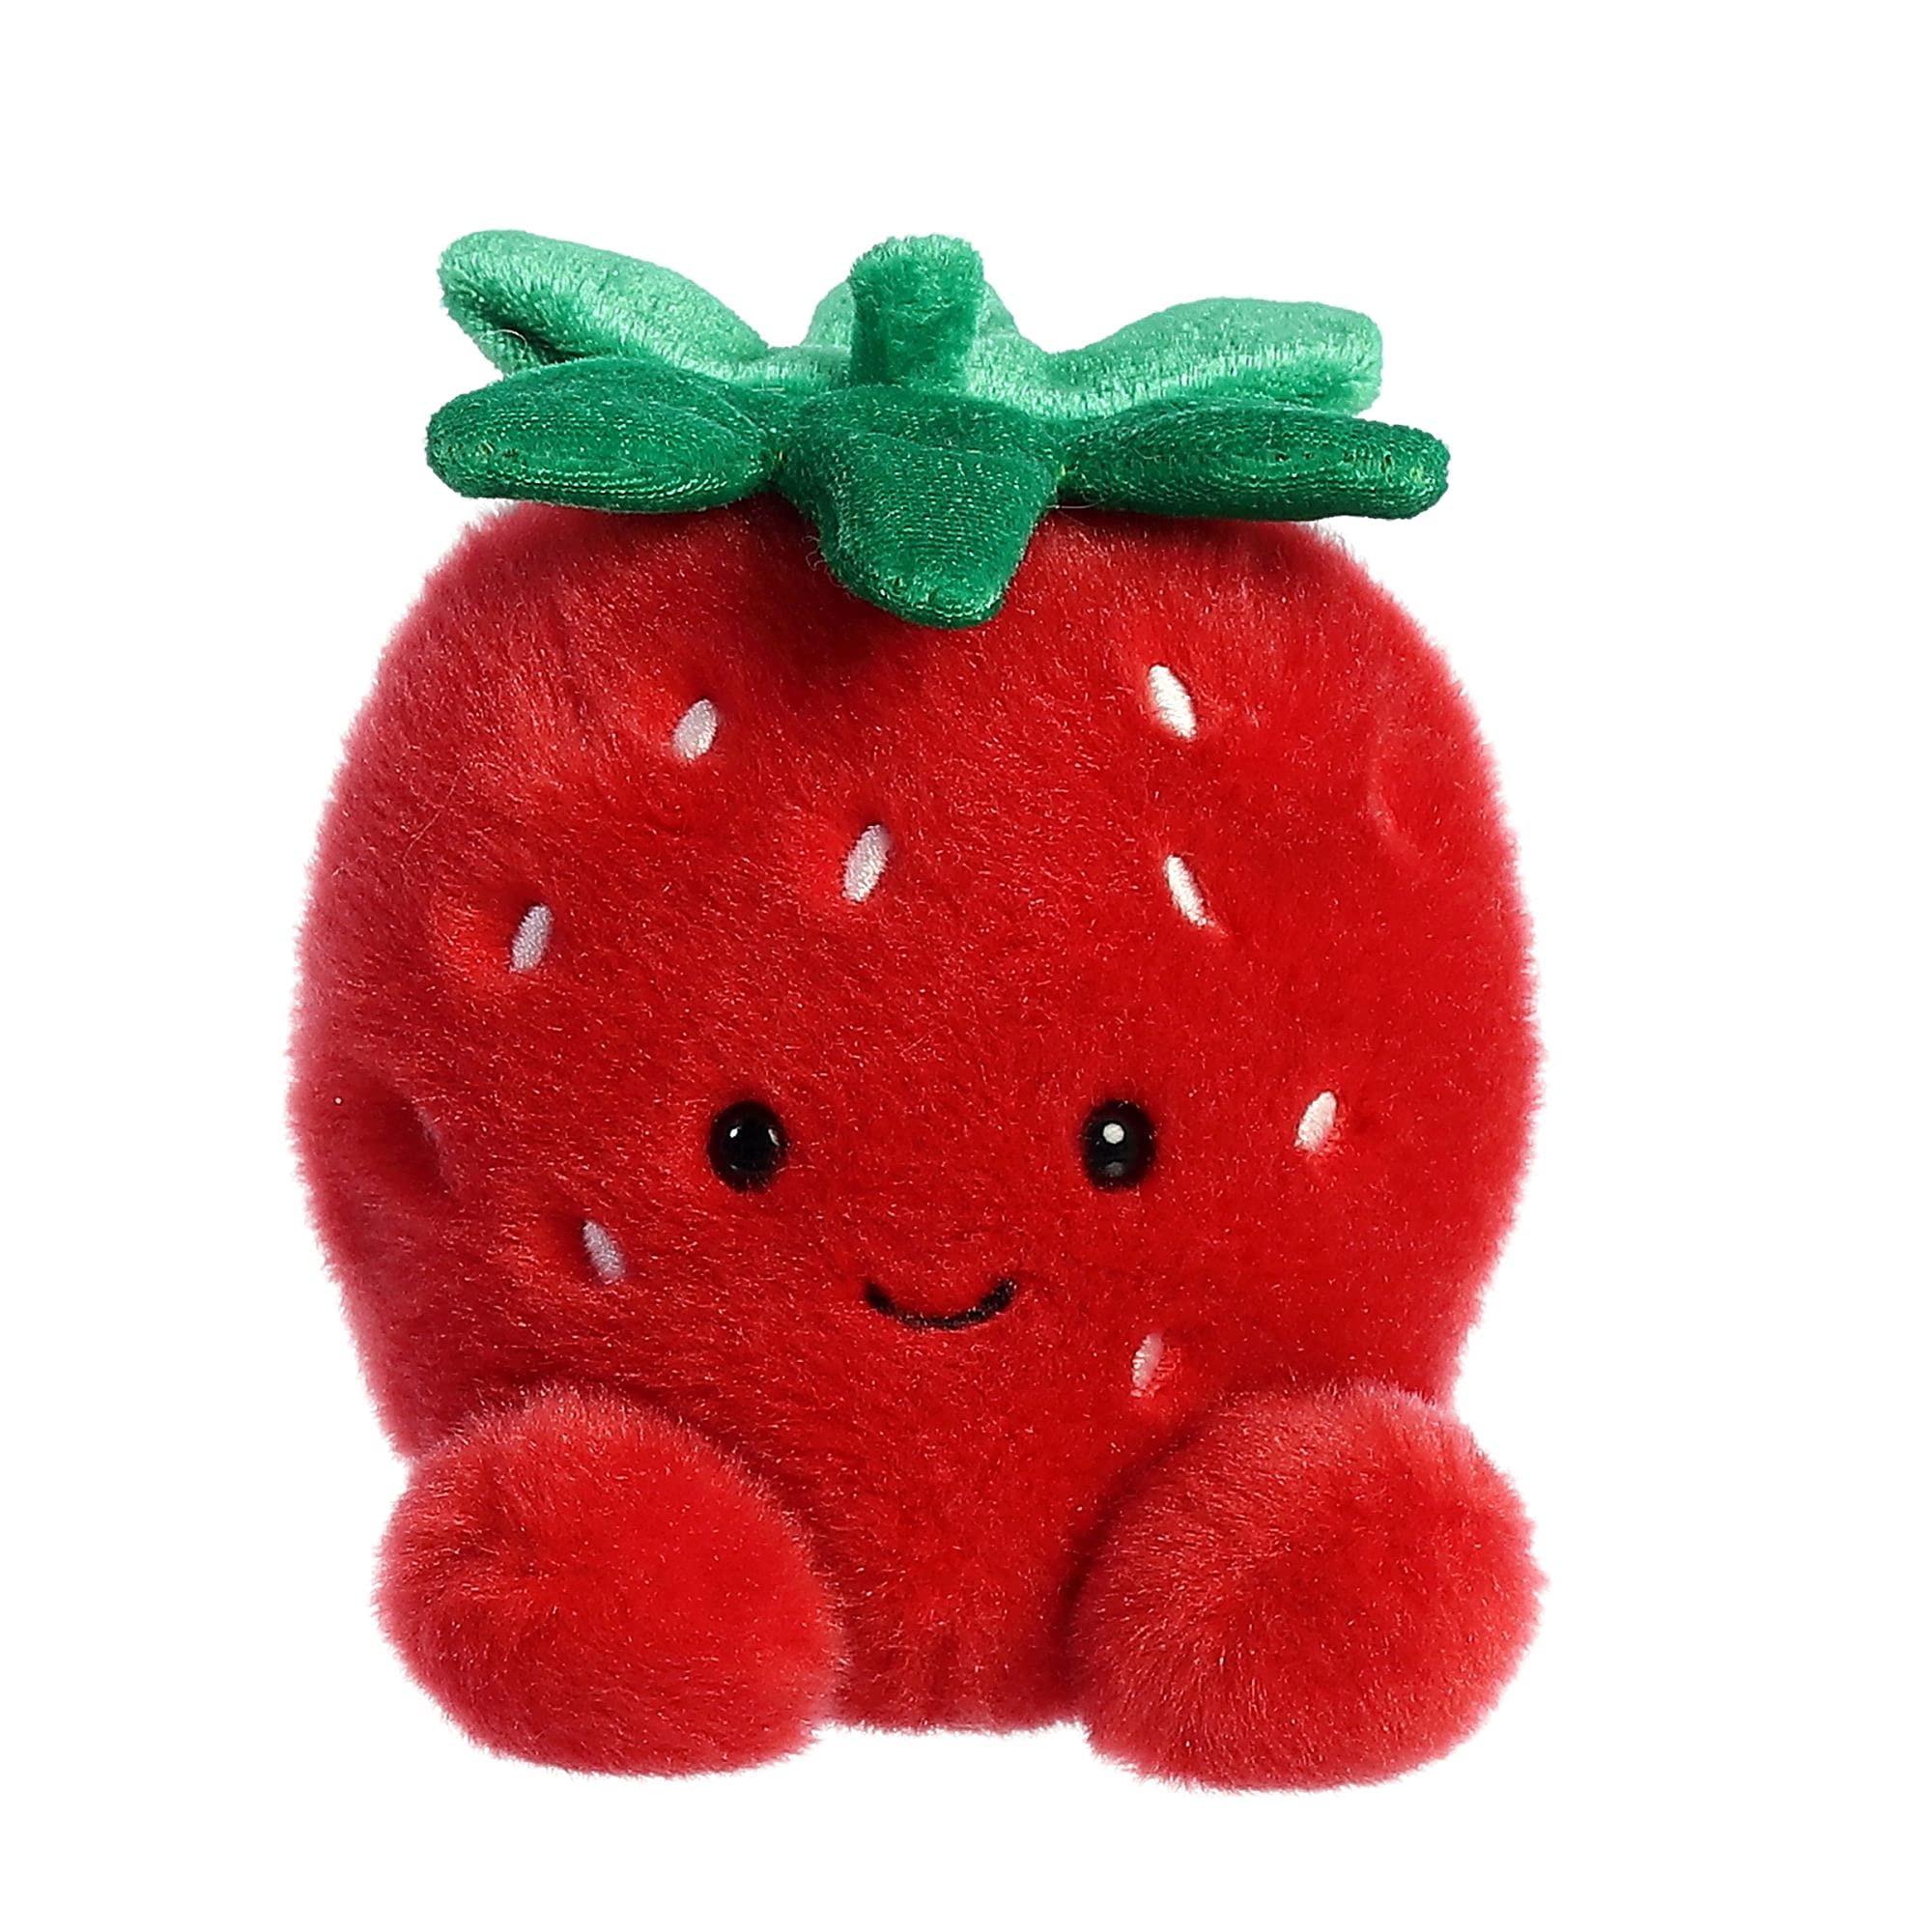 Aurora® Adorable Palm Pals™ Juicy Strawberry™ Stuffed Animal - Pocket-Sized Play - Collectable Fun - Red 5 Inches